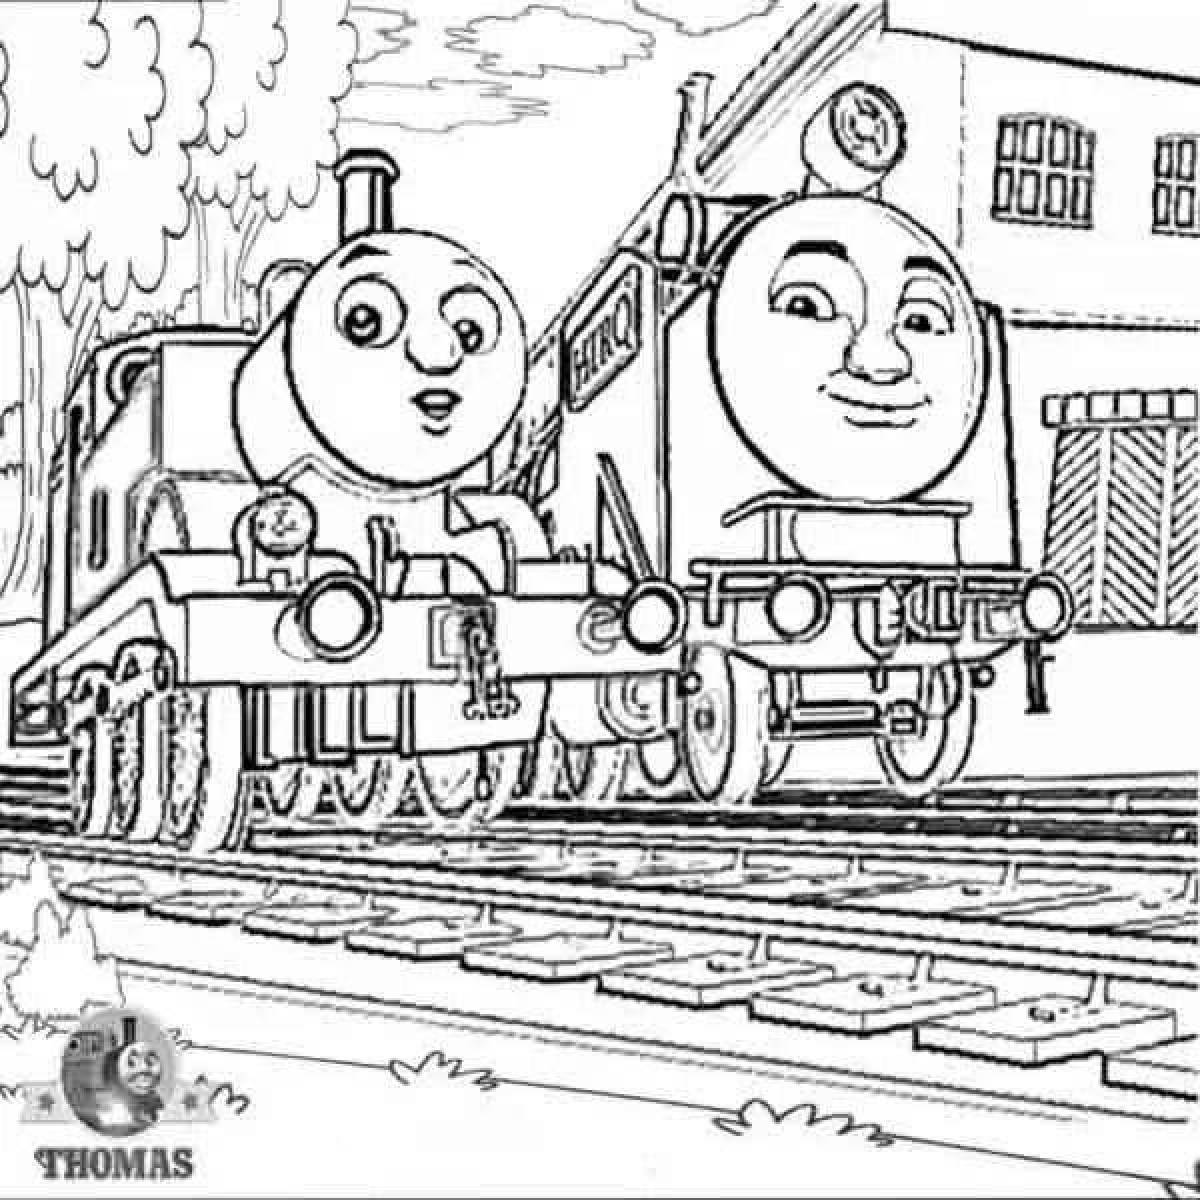 Charlie the engine fun coloring book